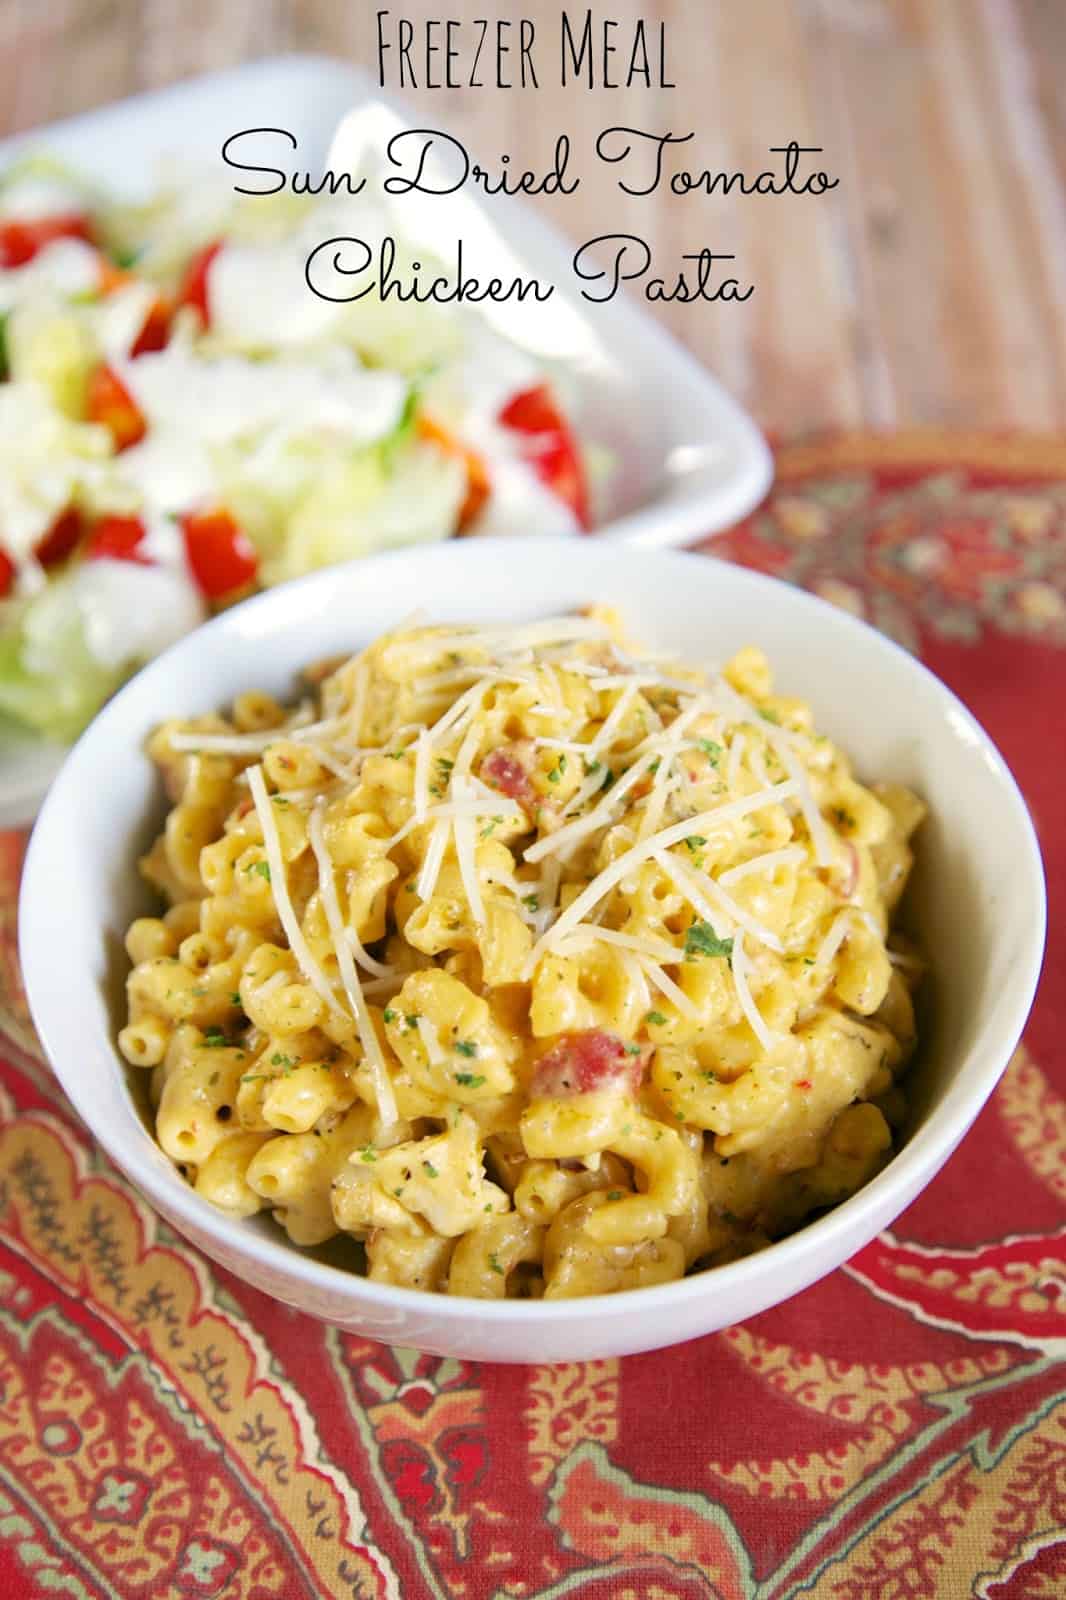 {Freezer Meal} Sun Dried Tomato Chicken Pasta - crazy delicious!!! Everyone cleaned their plate and asked for seconds!!! Pasta, chicken, sun dried tomato seasoning, garlic seasoning, dried mustard, cheddar cheese soup, evaporated milk, milk, cheddar cheese, mozzarella, and bacon. Can cook frozen in the slow cooker. We make this at least once a month! #freezermeal #pasta #slowcooker #chicken